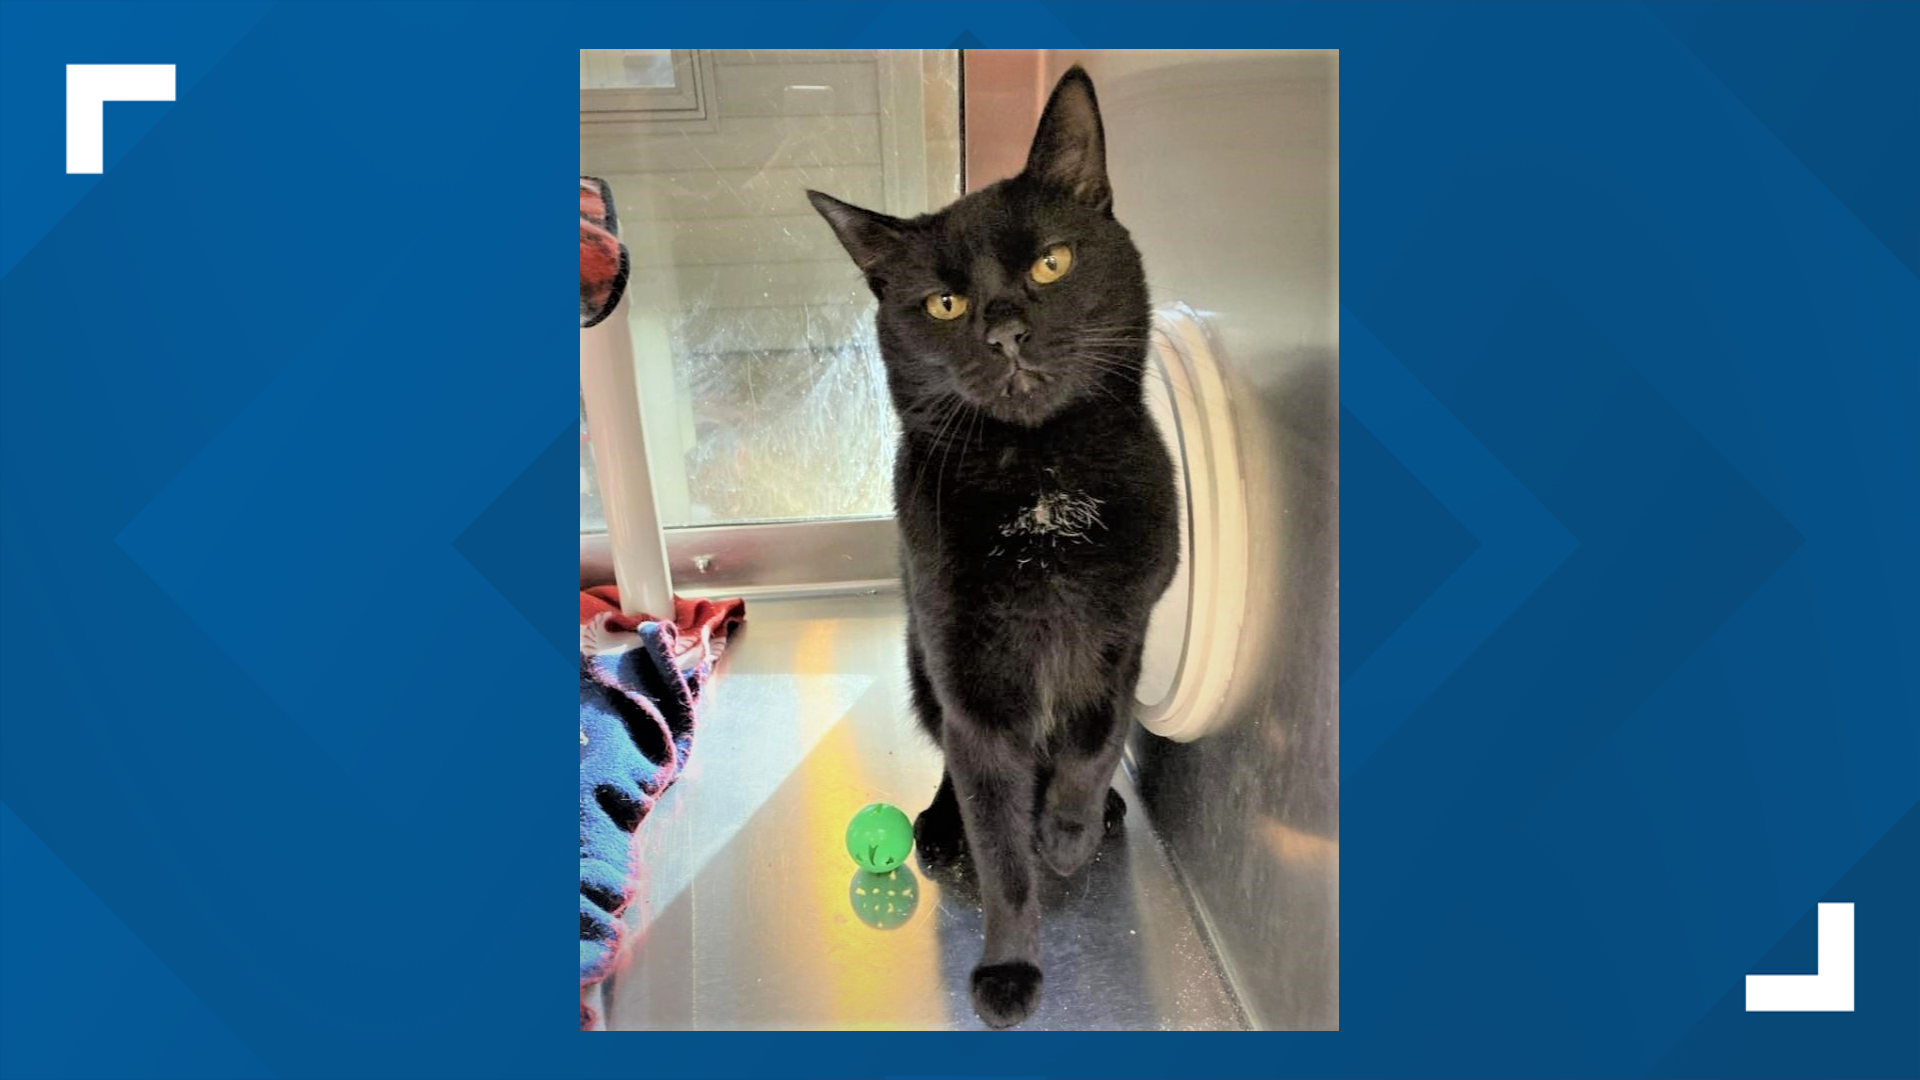 Batman would be the perfect pet for "someone who wants the true cat experience – moody, spirited, and very affectionate on his own terms."